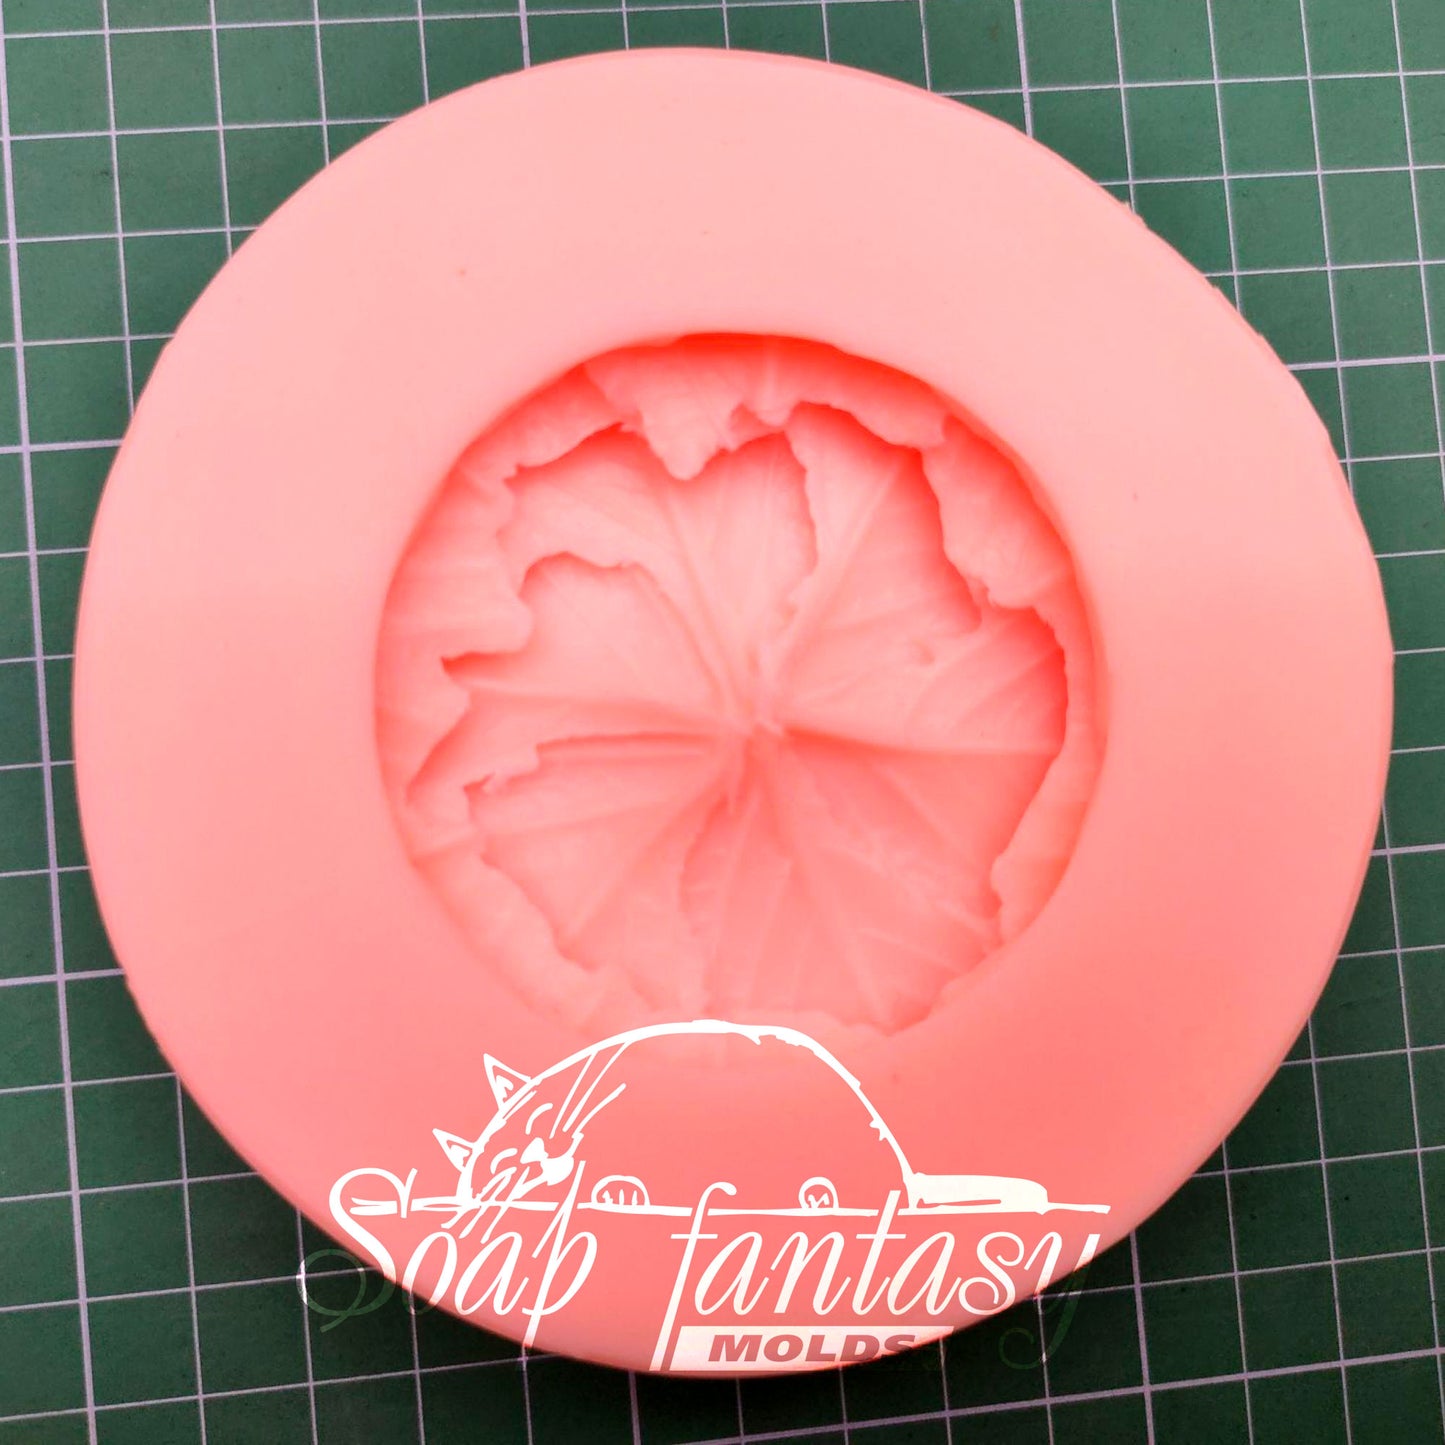 Base of leaves for a flower silicone mold for soap making